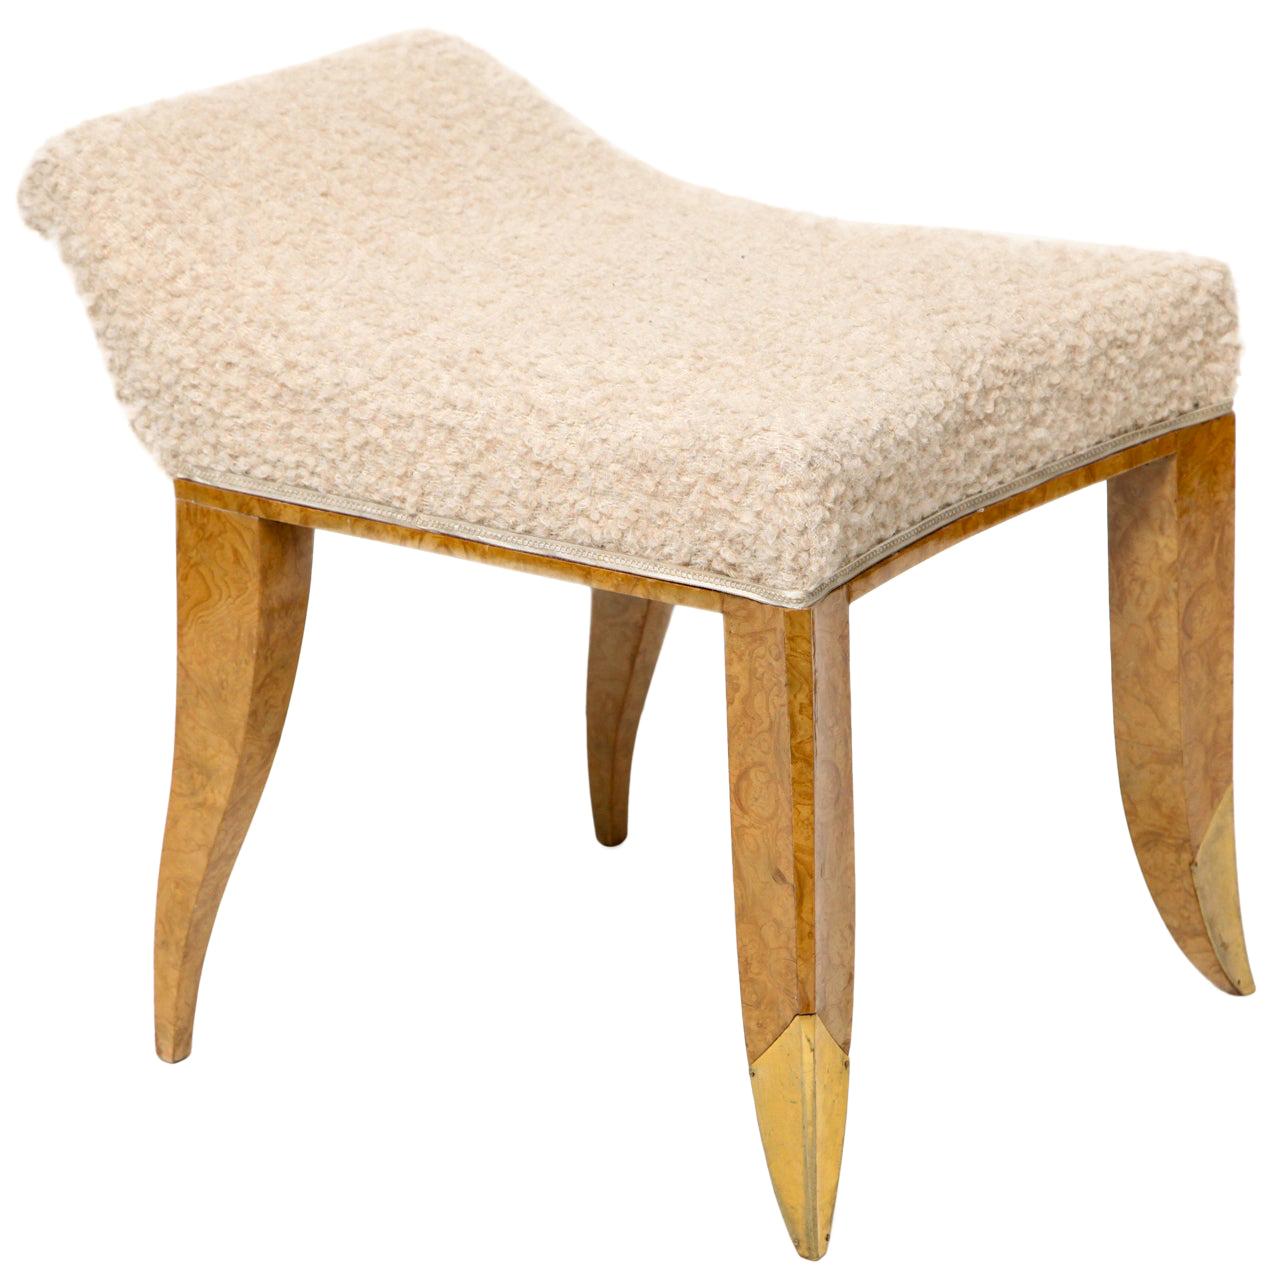 Jules Deroubaix, Stool in Burled Elm, Gilt Bronze, and Shearling, France